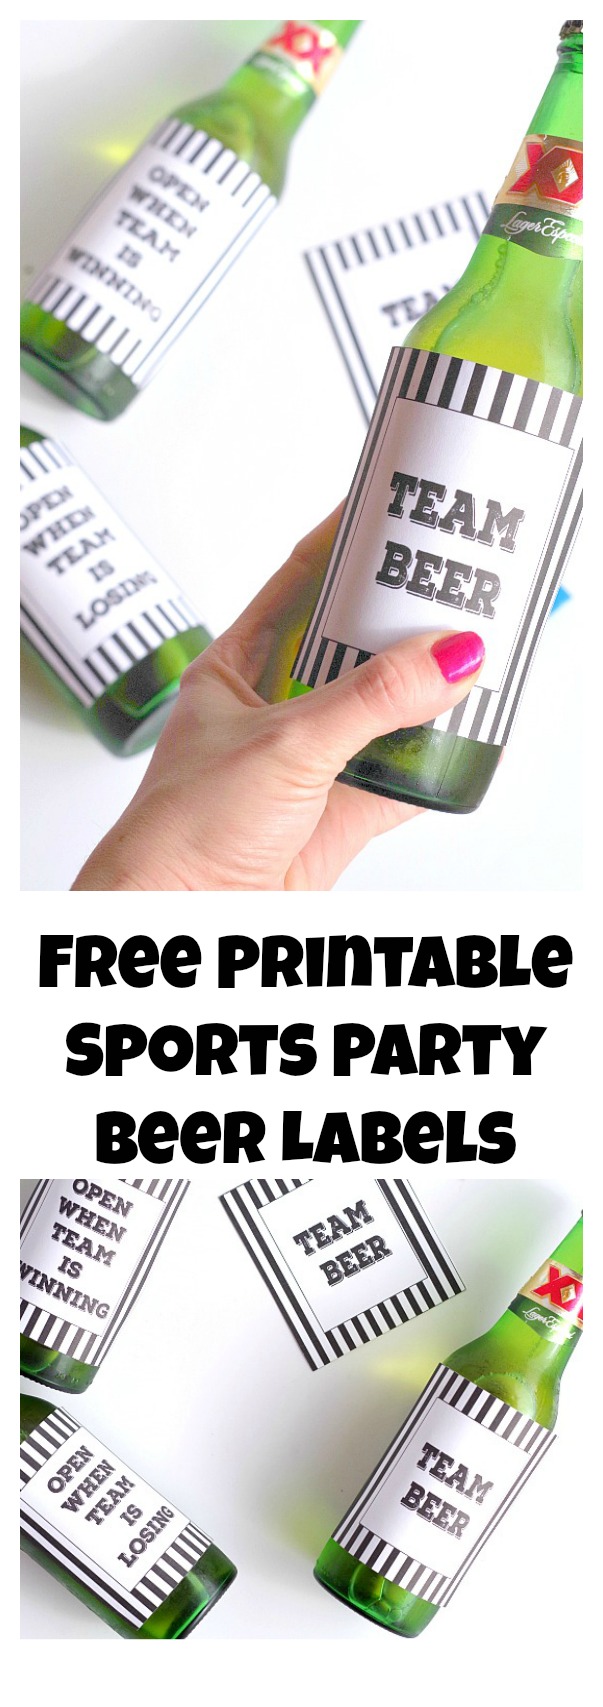 Free Printable Sports Party Beer Labels